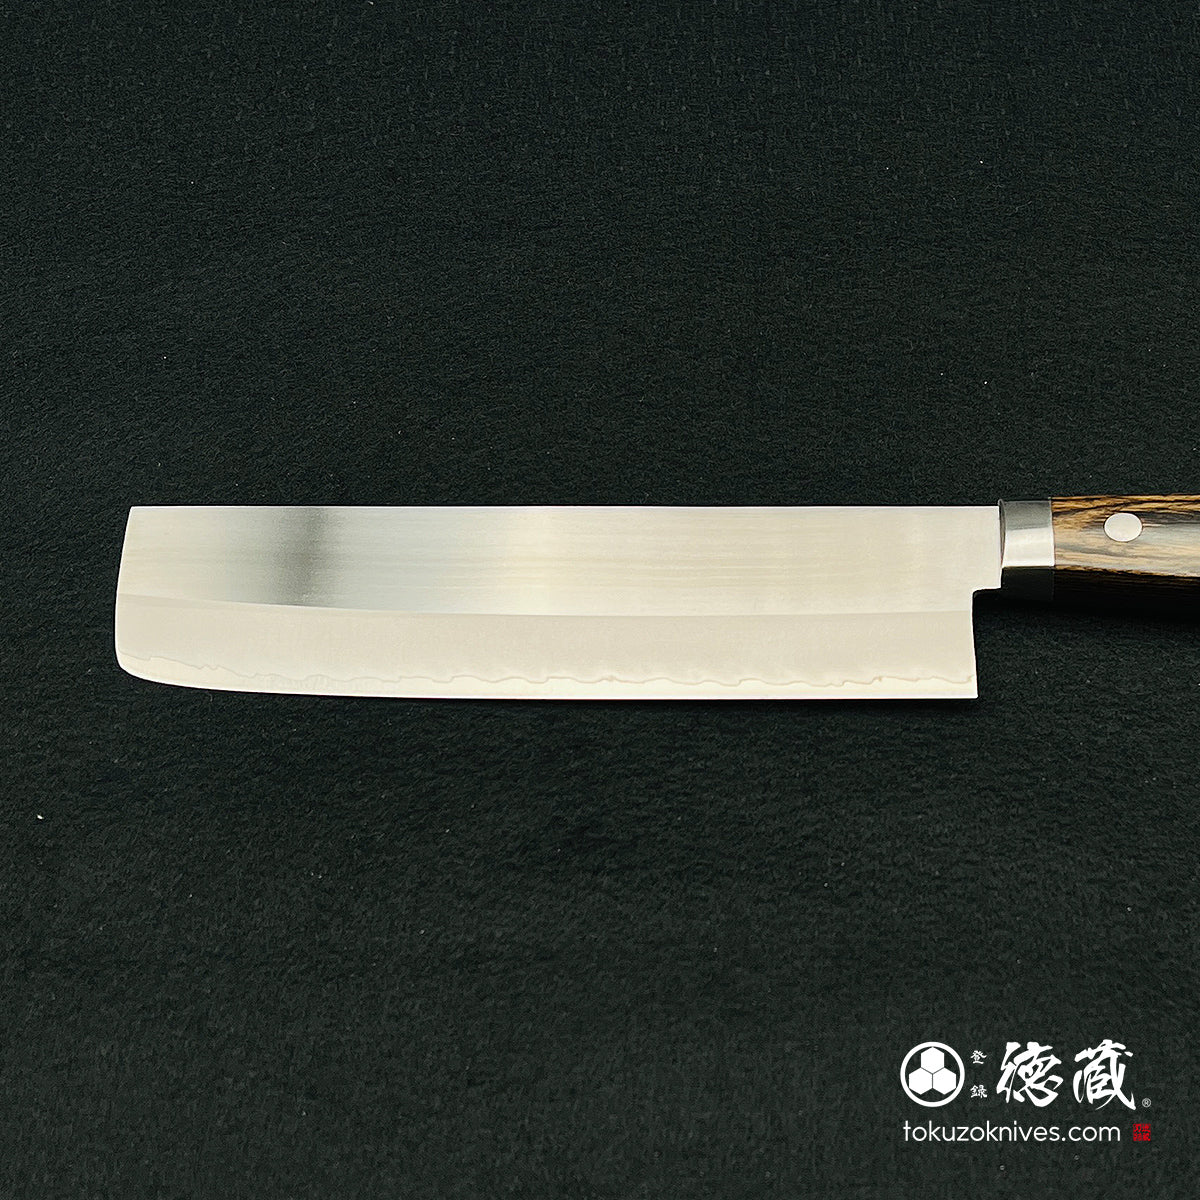 VG1 vegetable knife with scotch handle